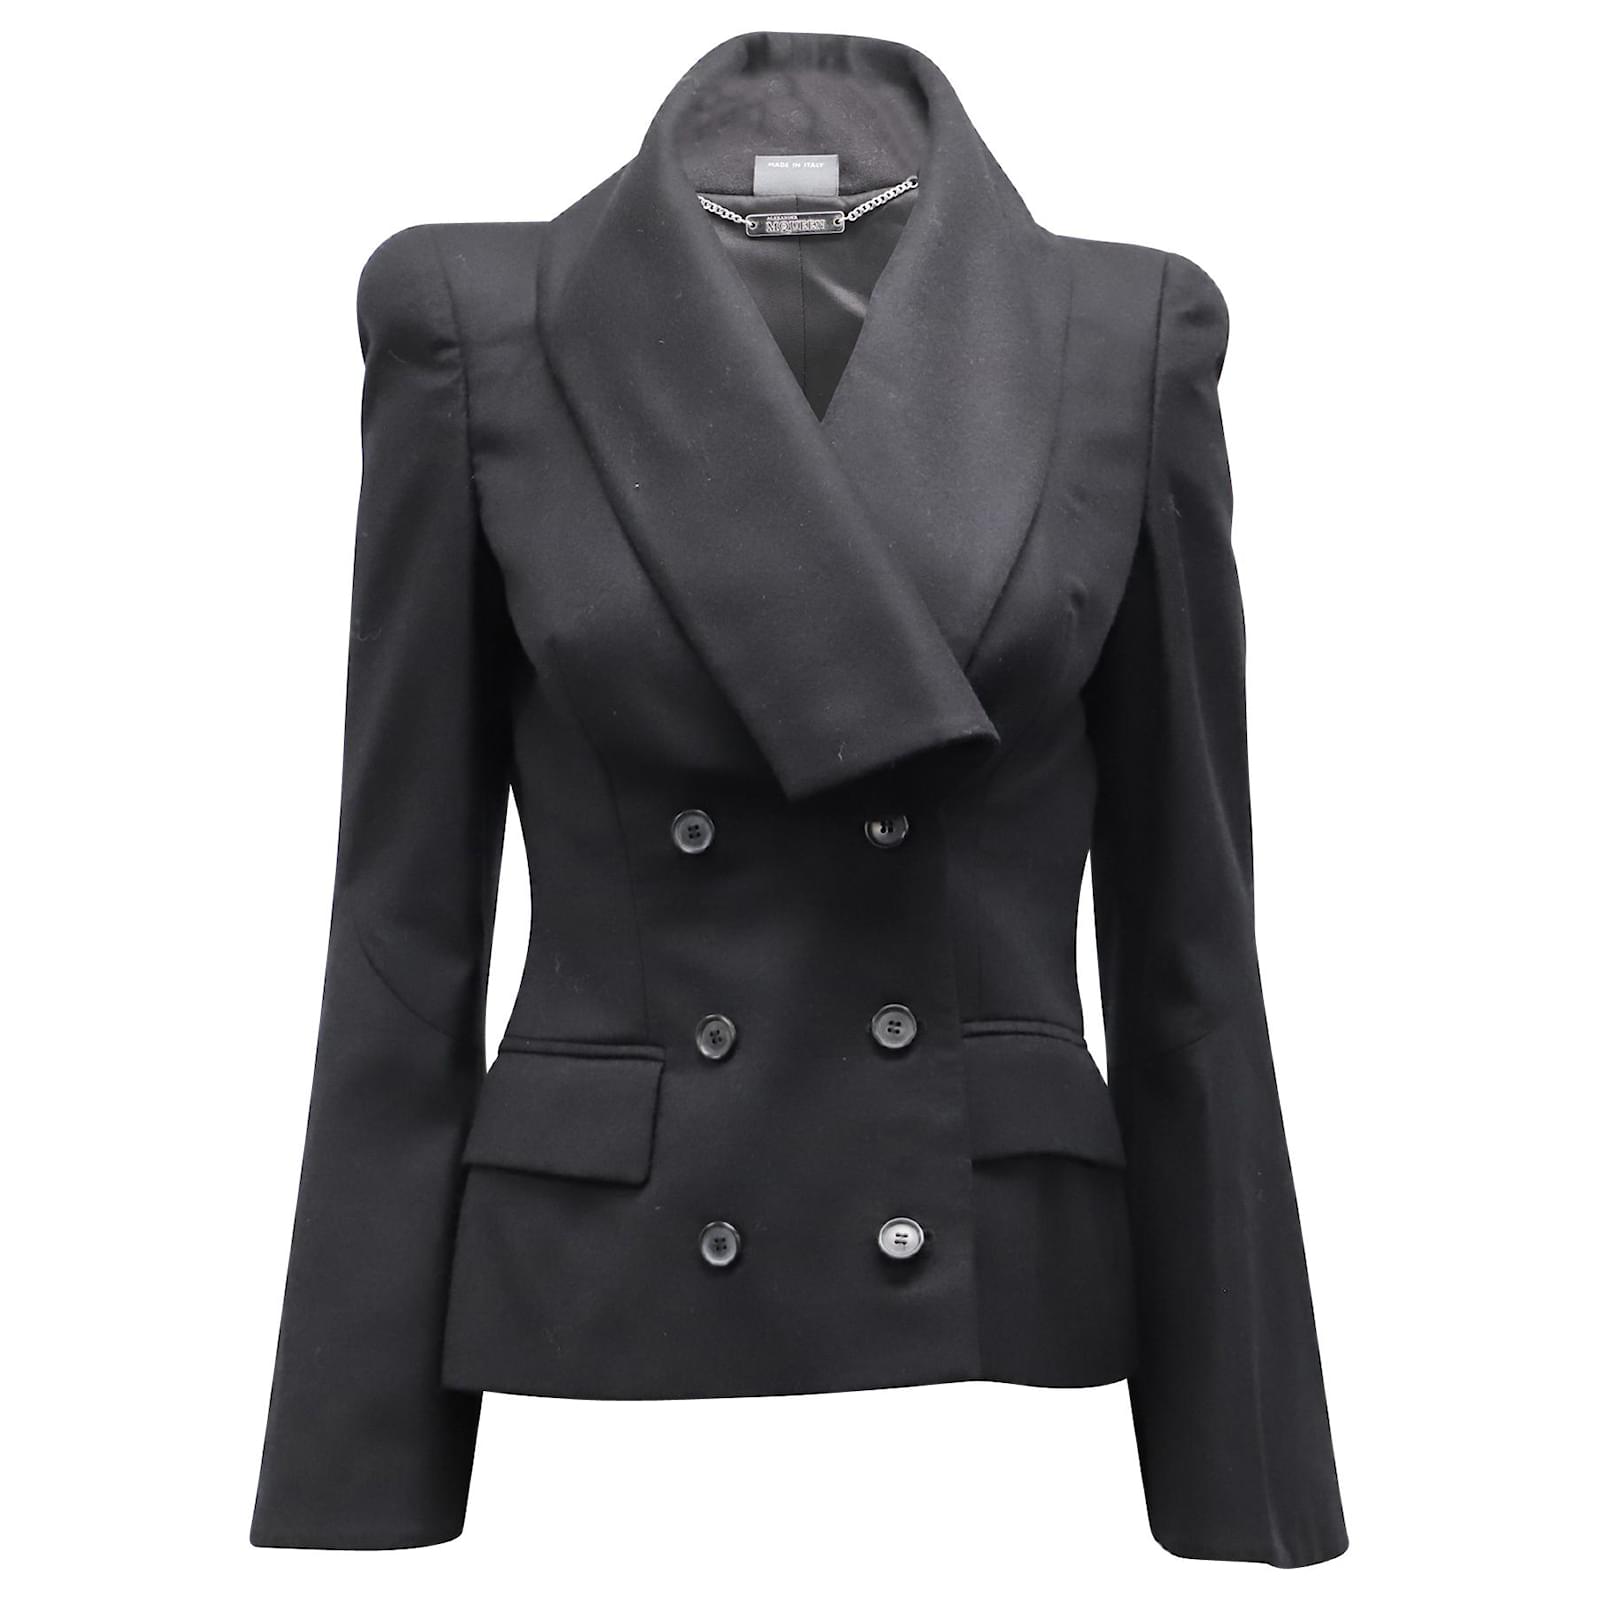 Alexander McQueen lined Breasted Jacket in Black Cashmere Wool ref ...